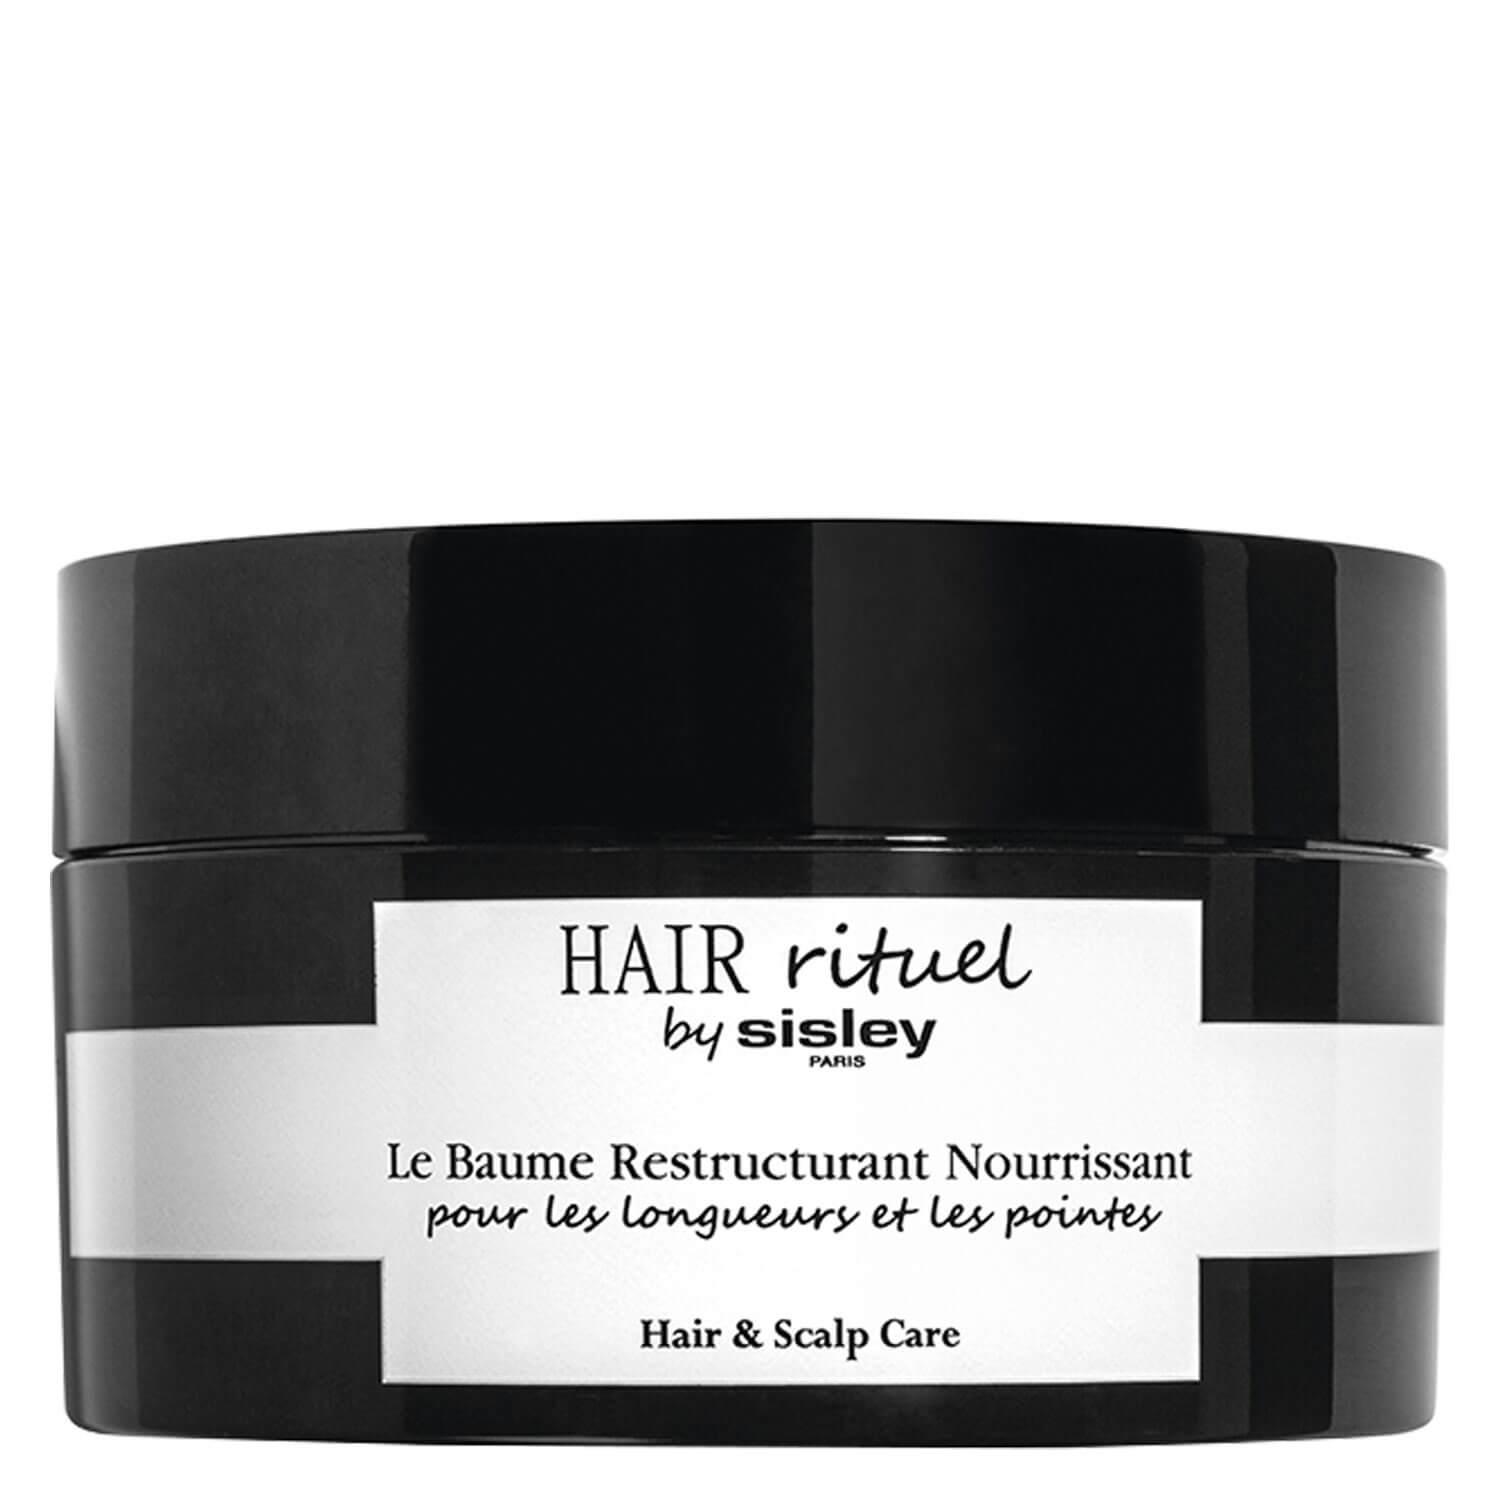 Hair Rituel by Sisley - Le Baume Restructurant Nourrissant